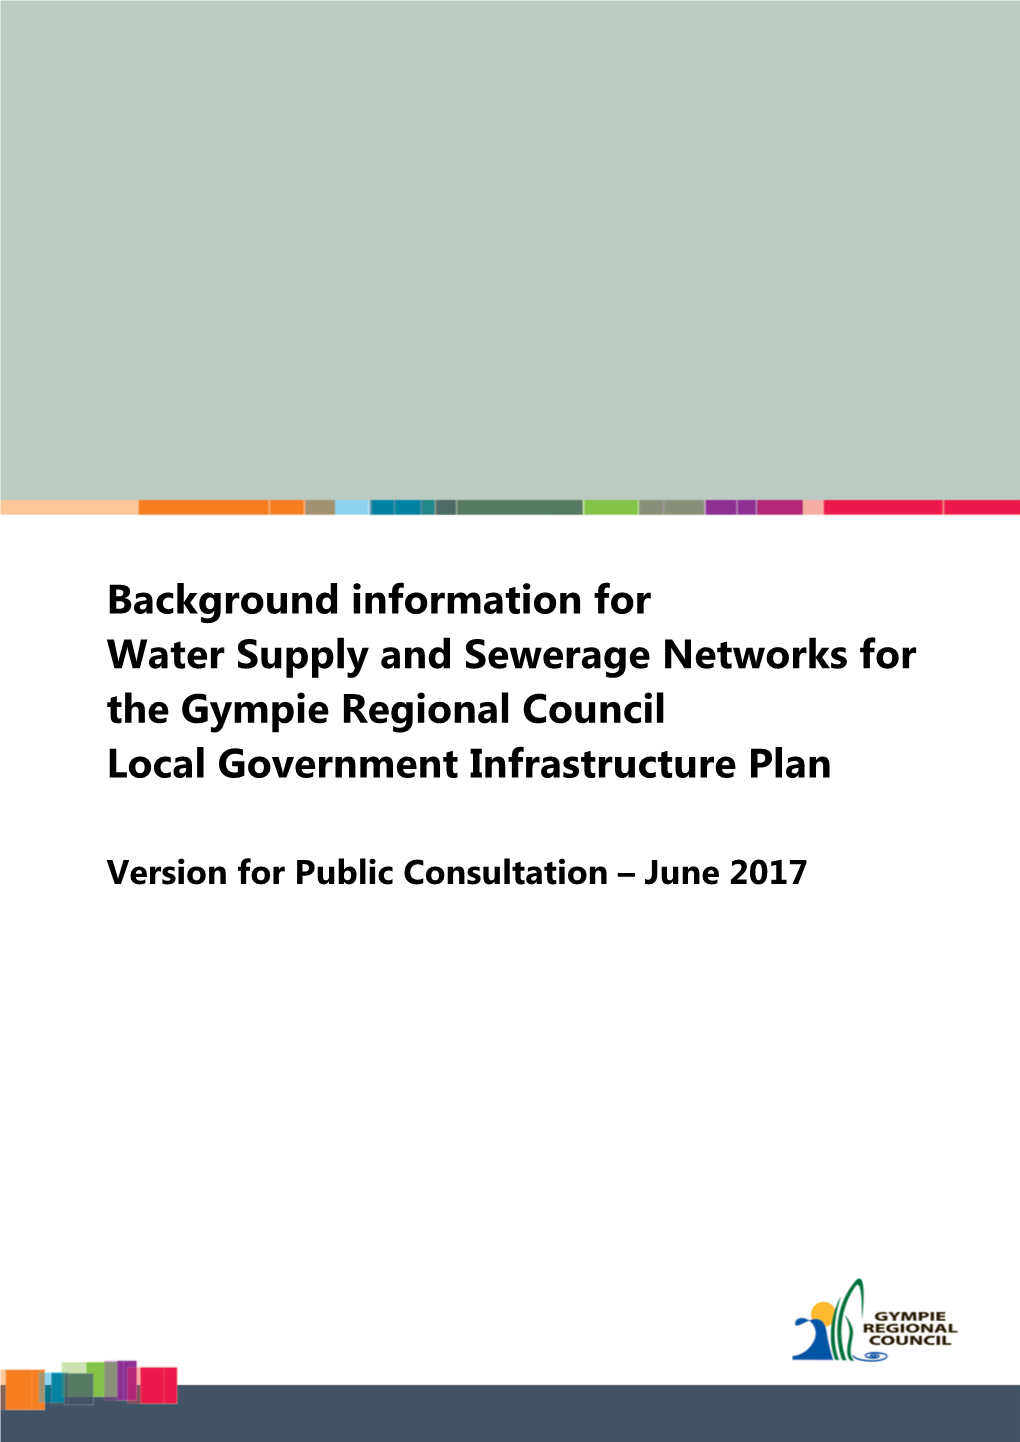 Background Information for Water Supply and Sewerage Networks for the Gympie Regional Council Local Government Infrastructure Plan